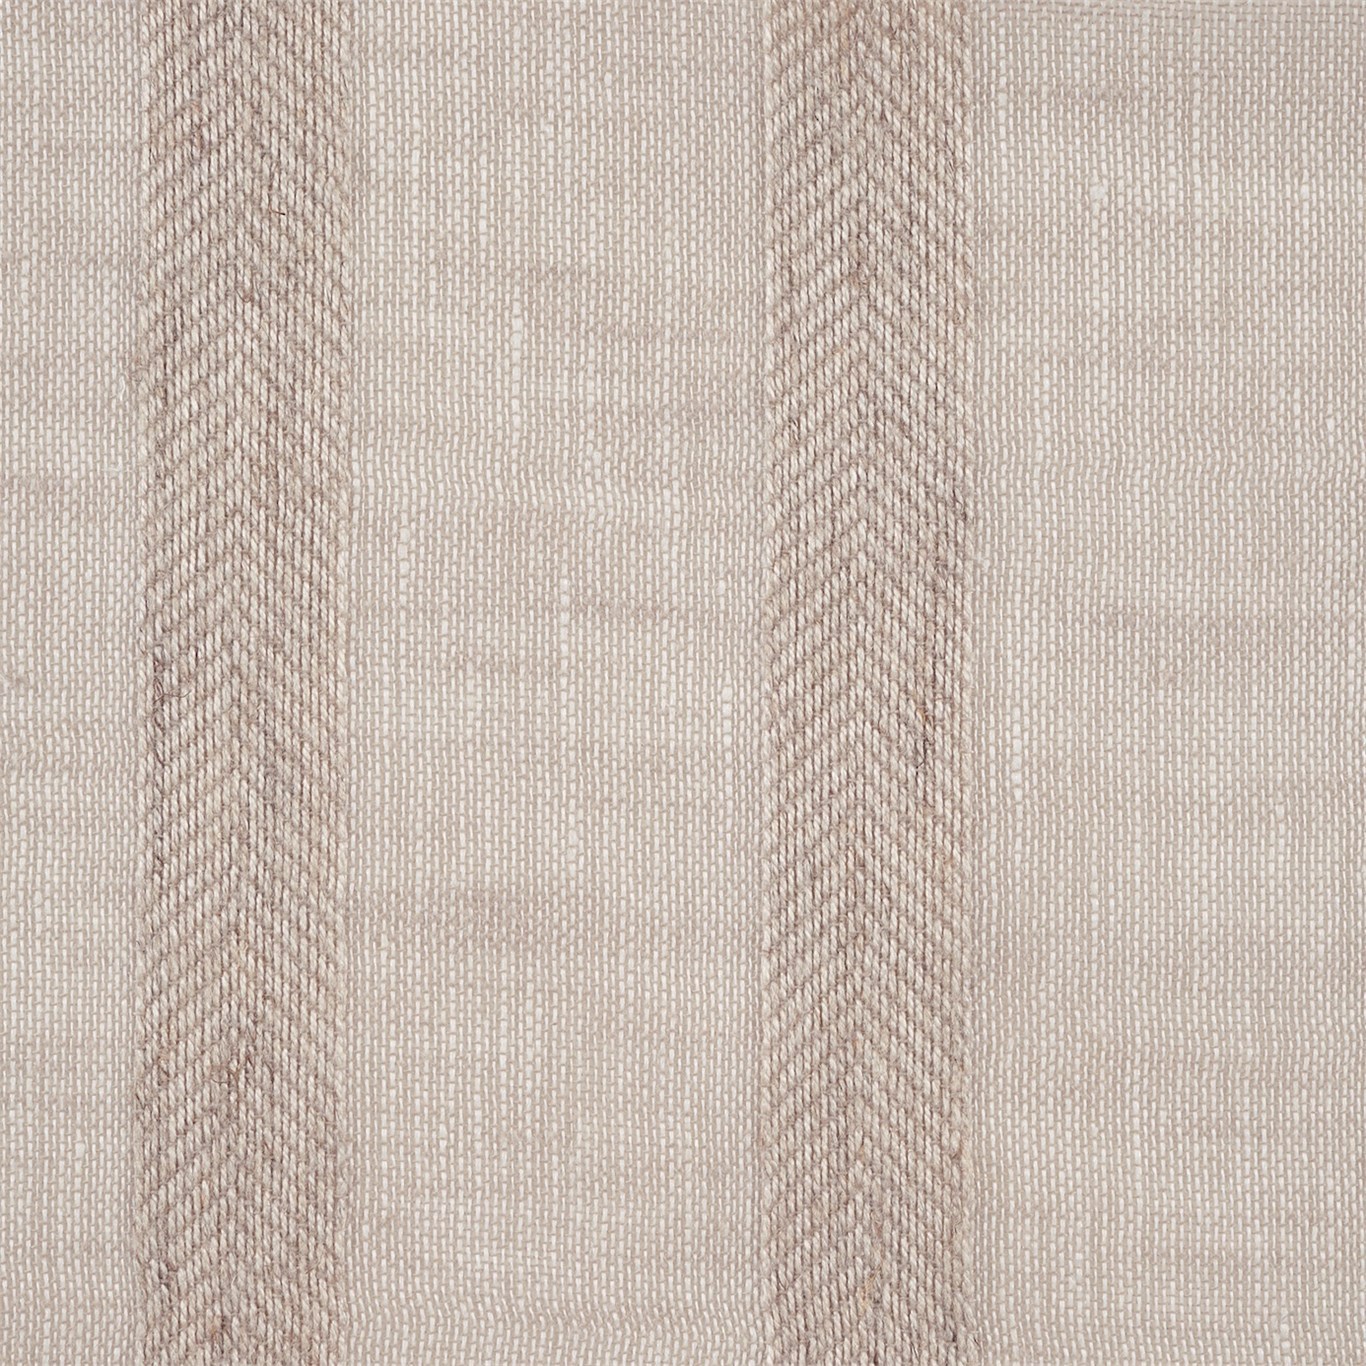 Purity Voiles Sesame Fabric by HAR